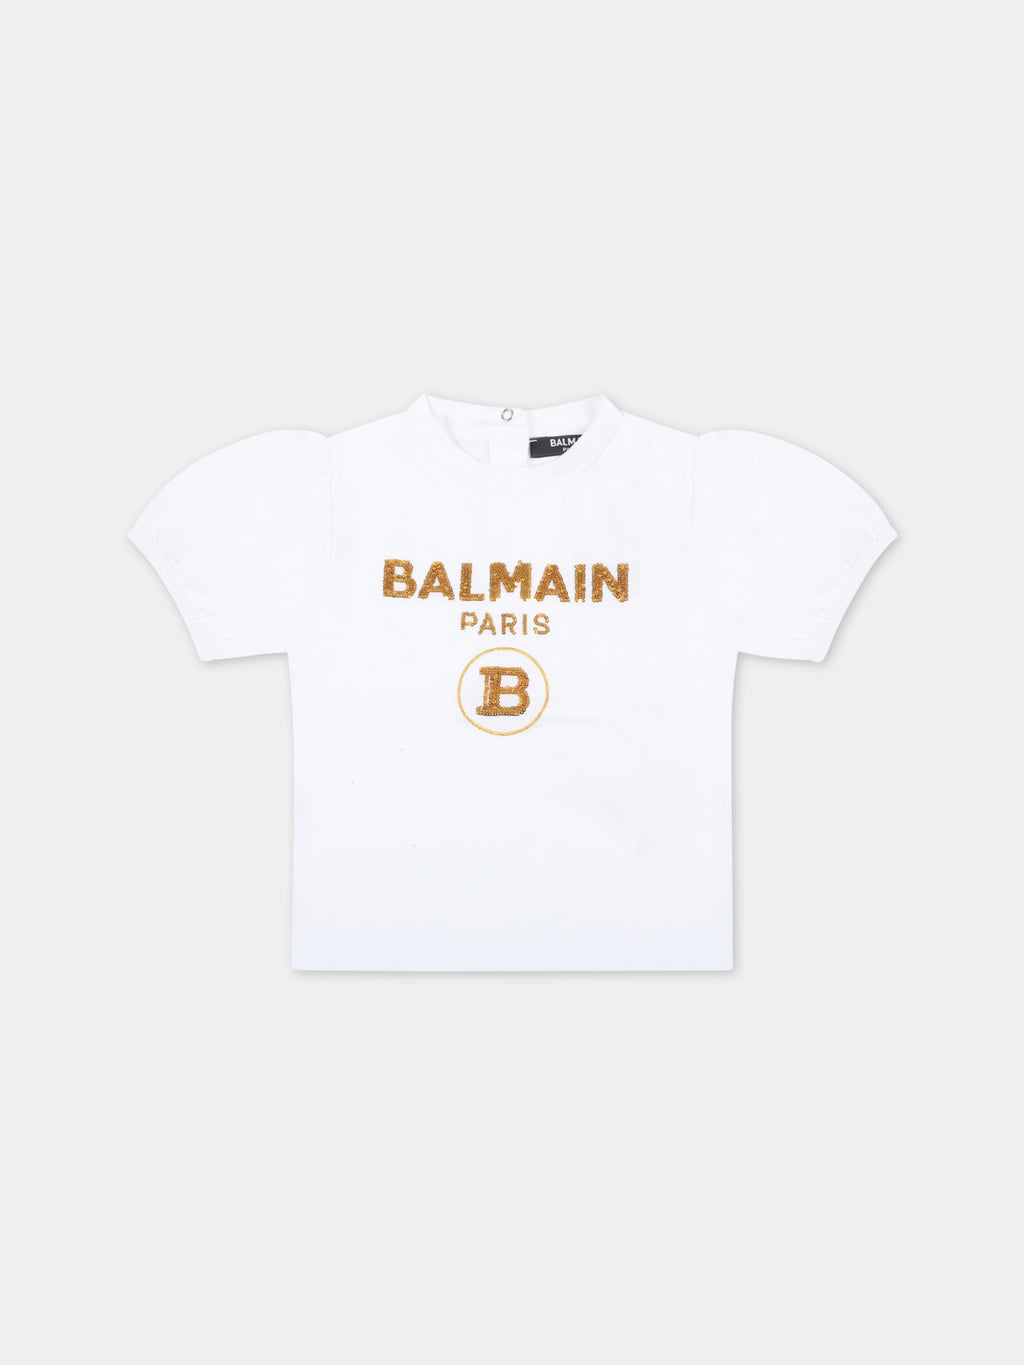 White t-shirt for baby girl with gold logo